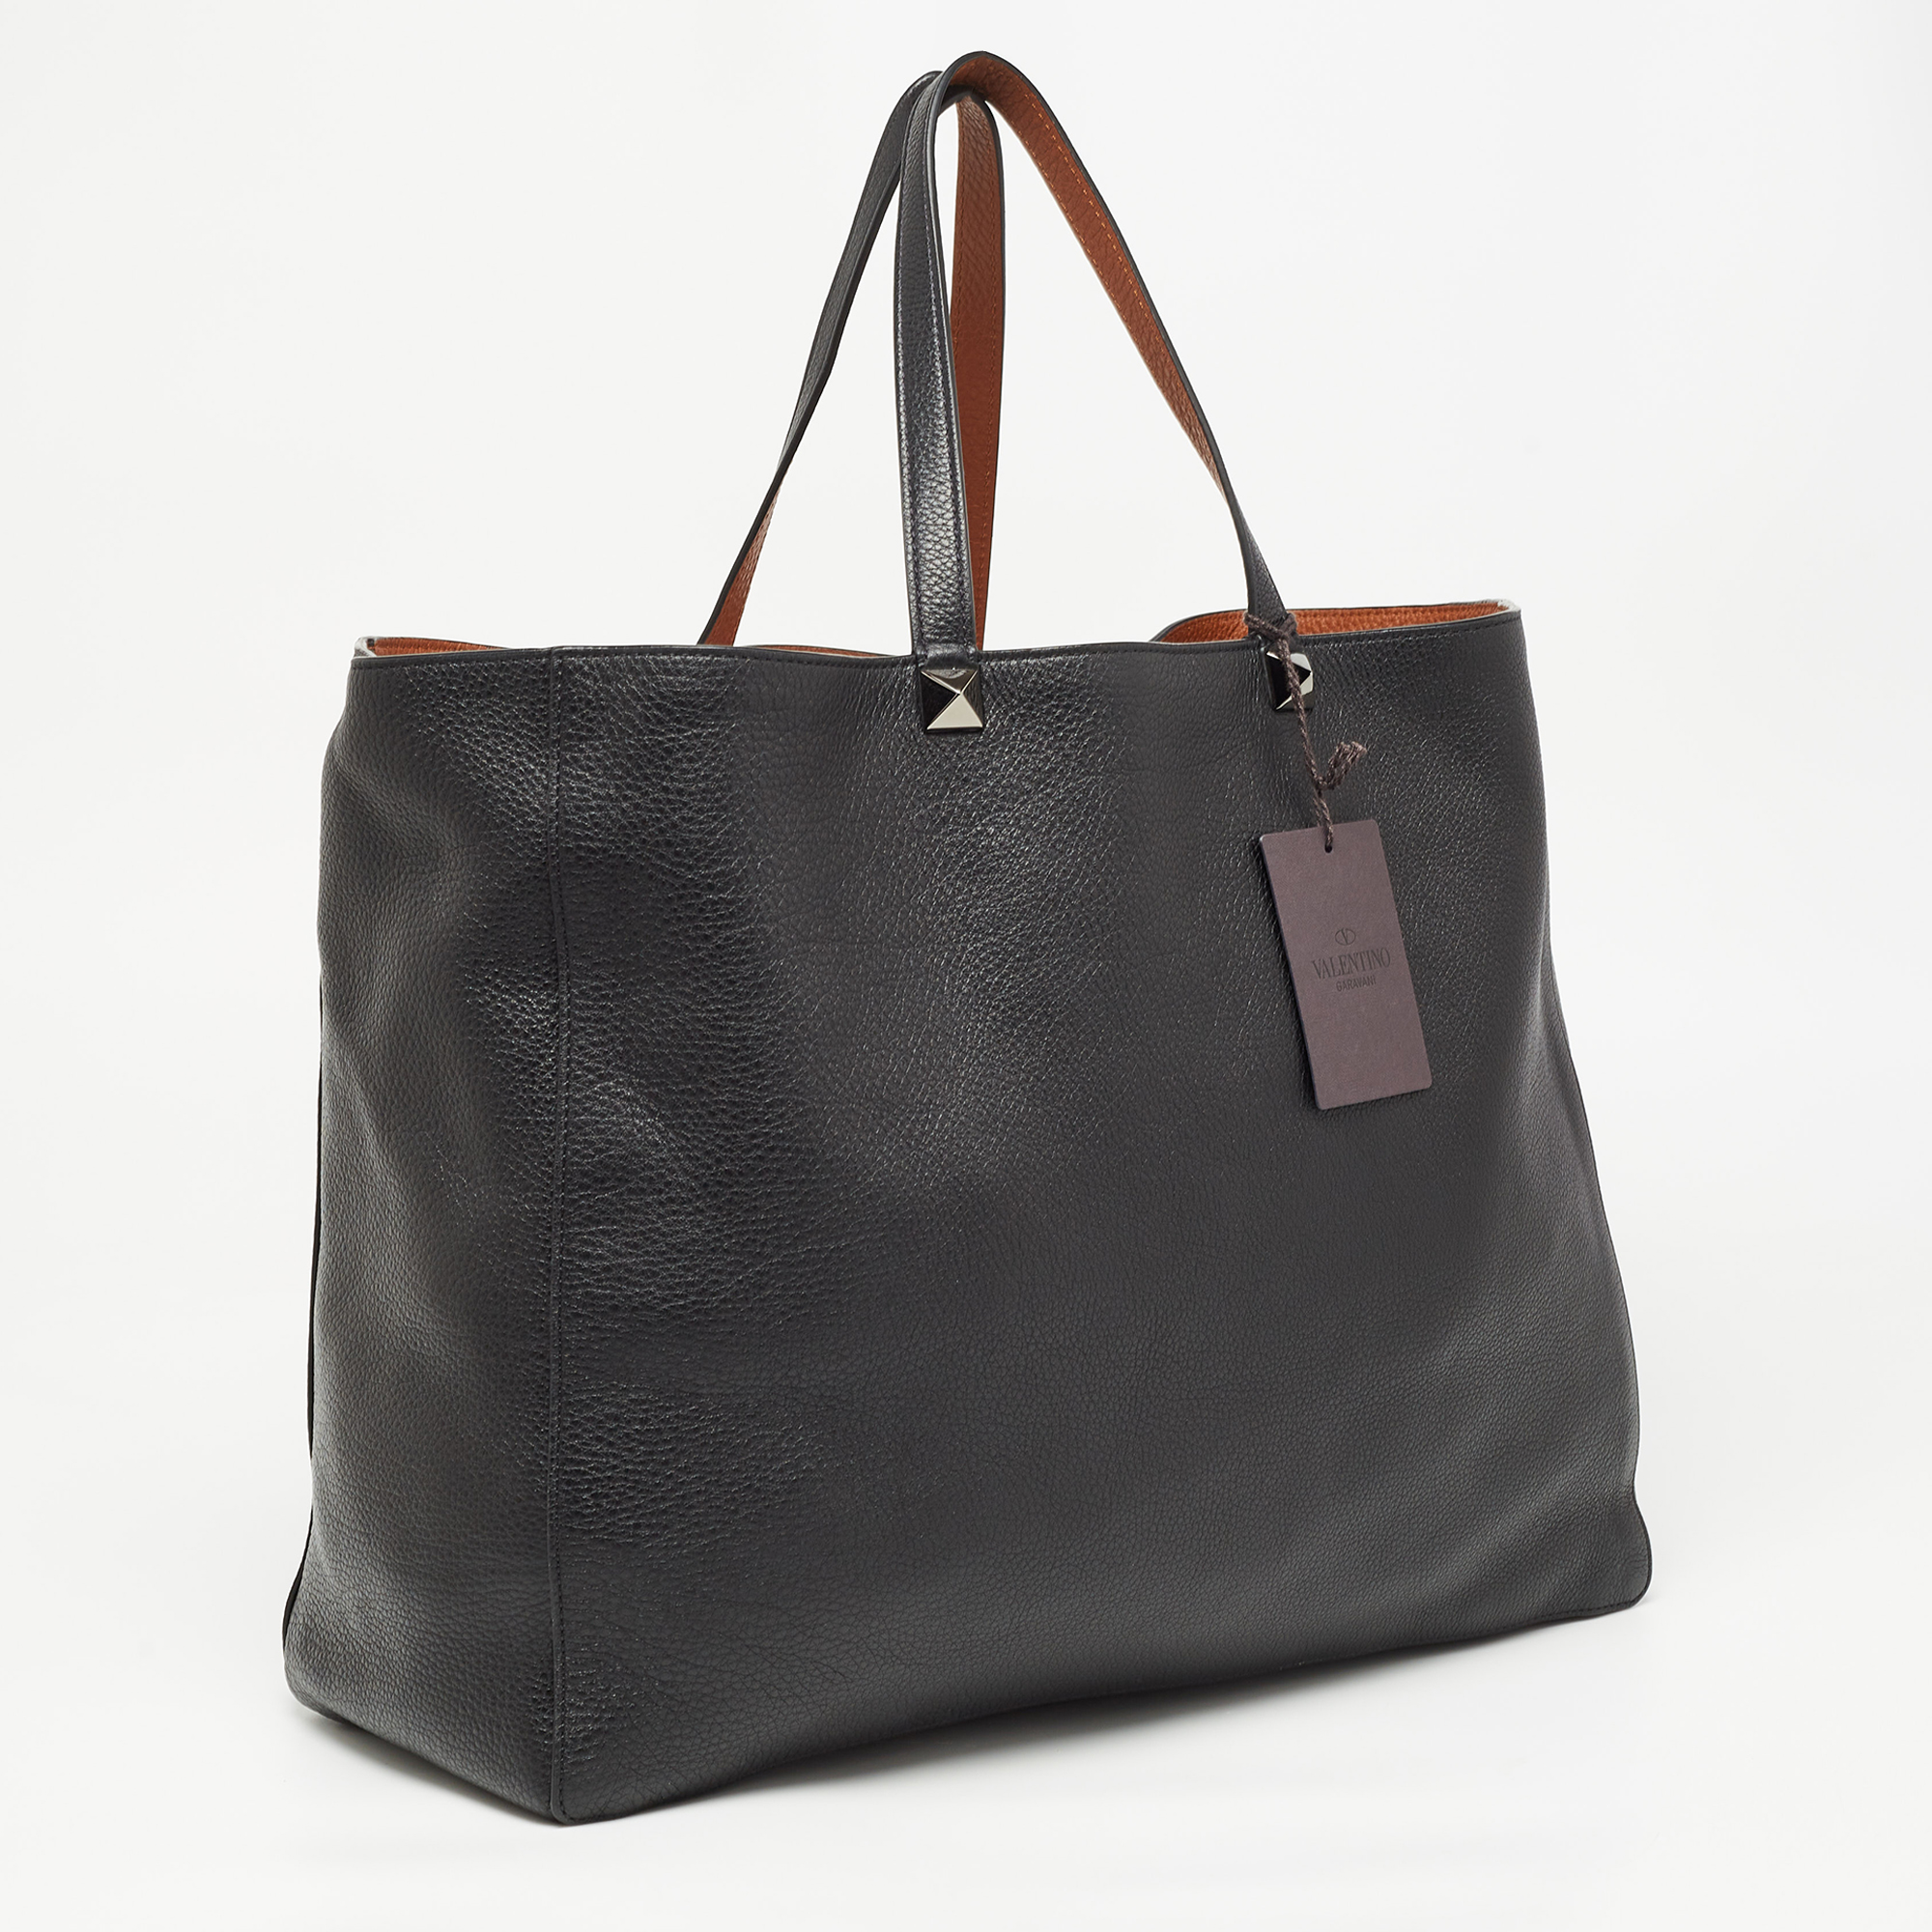 Valentino Brown/Black Leather Identity Reversible Tote